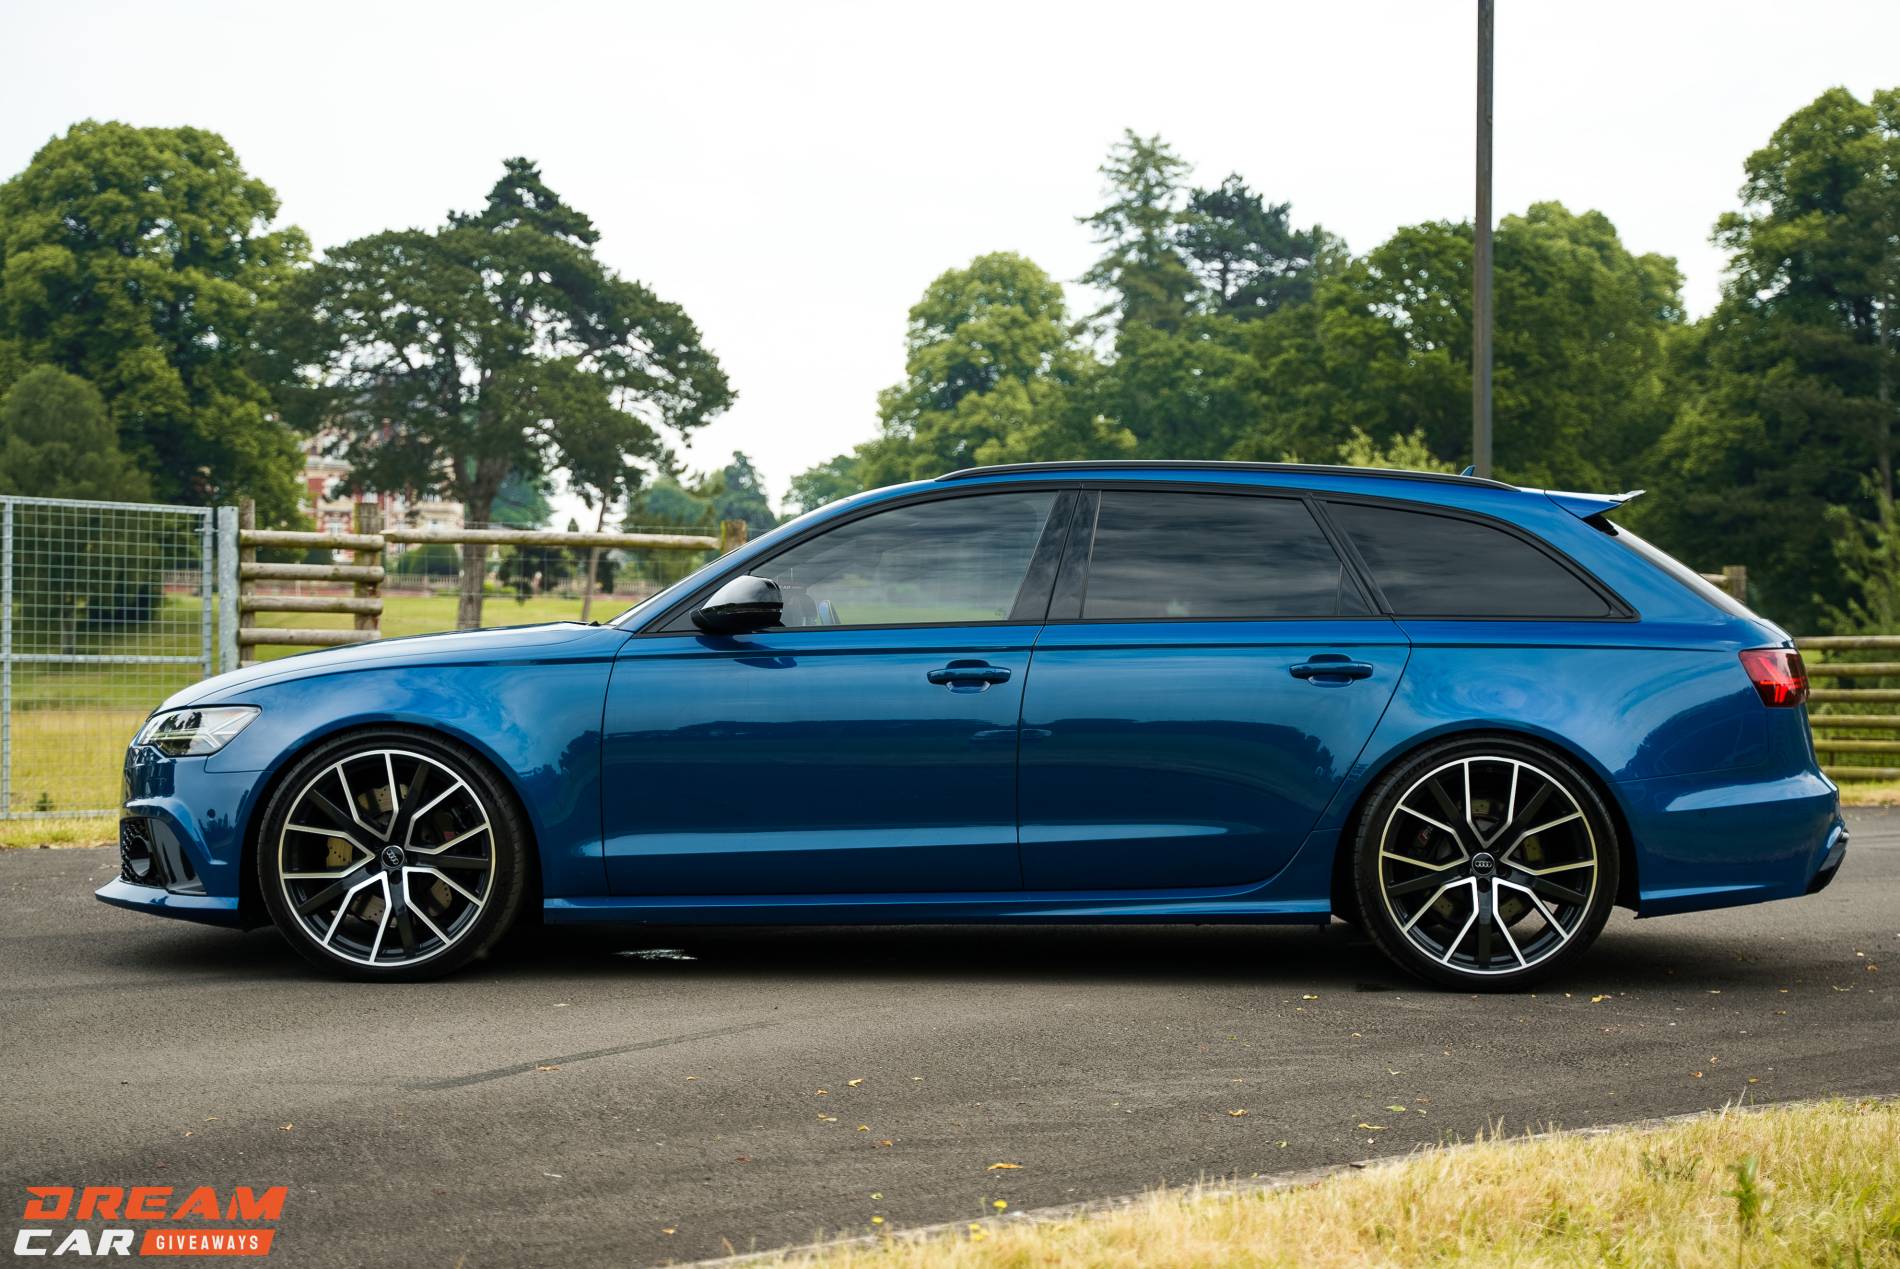 Audi RS6 Performance & £1000 or £40,000 Tax Free